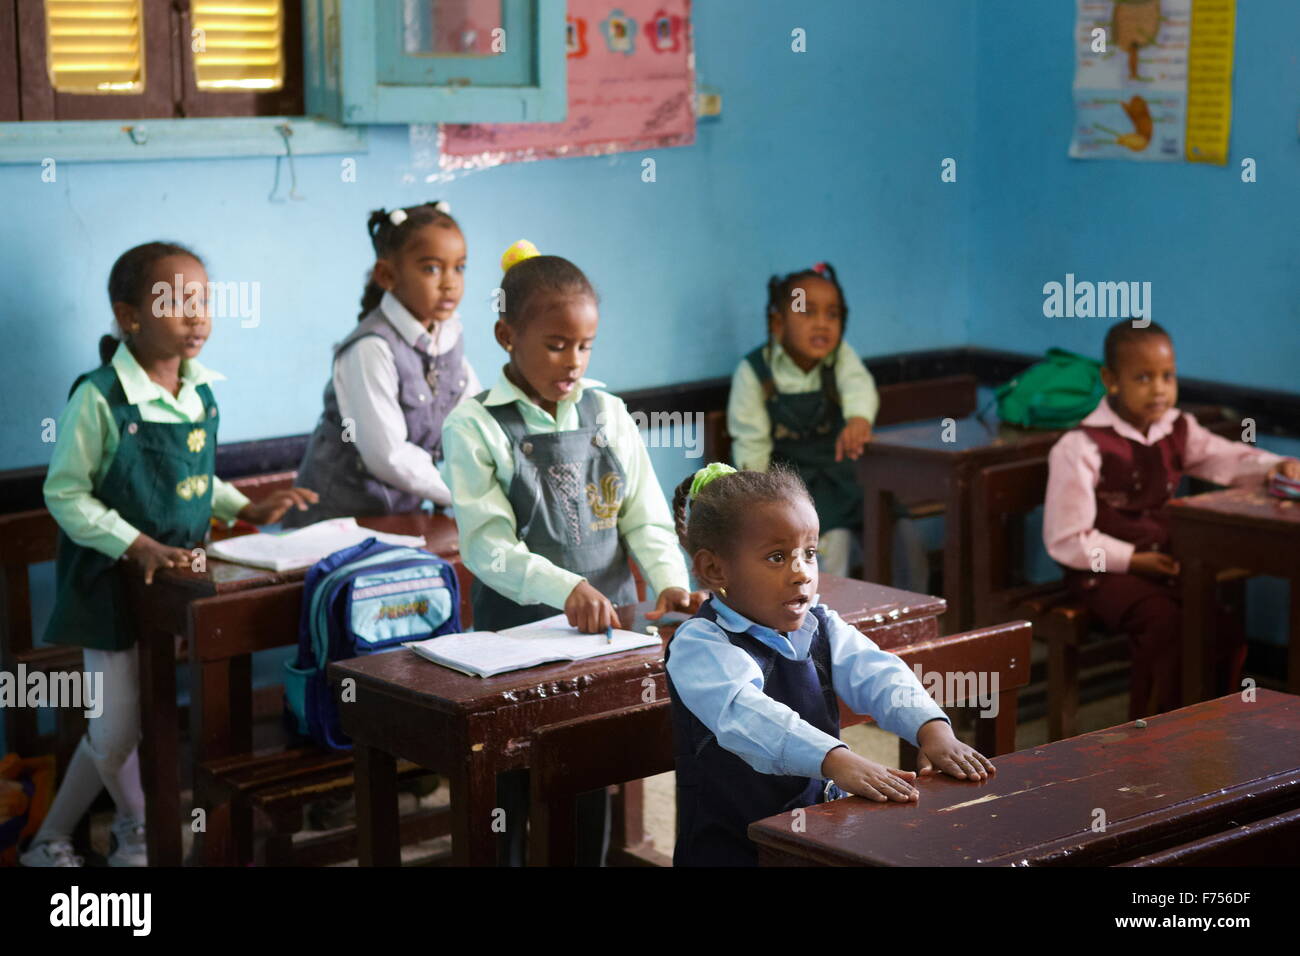 Egyptian children - Nubian village, child in the Nubian school, girl and boy learning in a small classroom Stock Photo